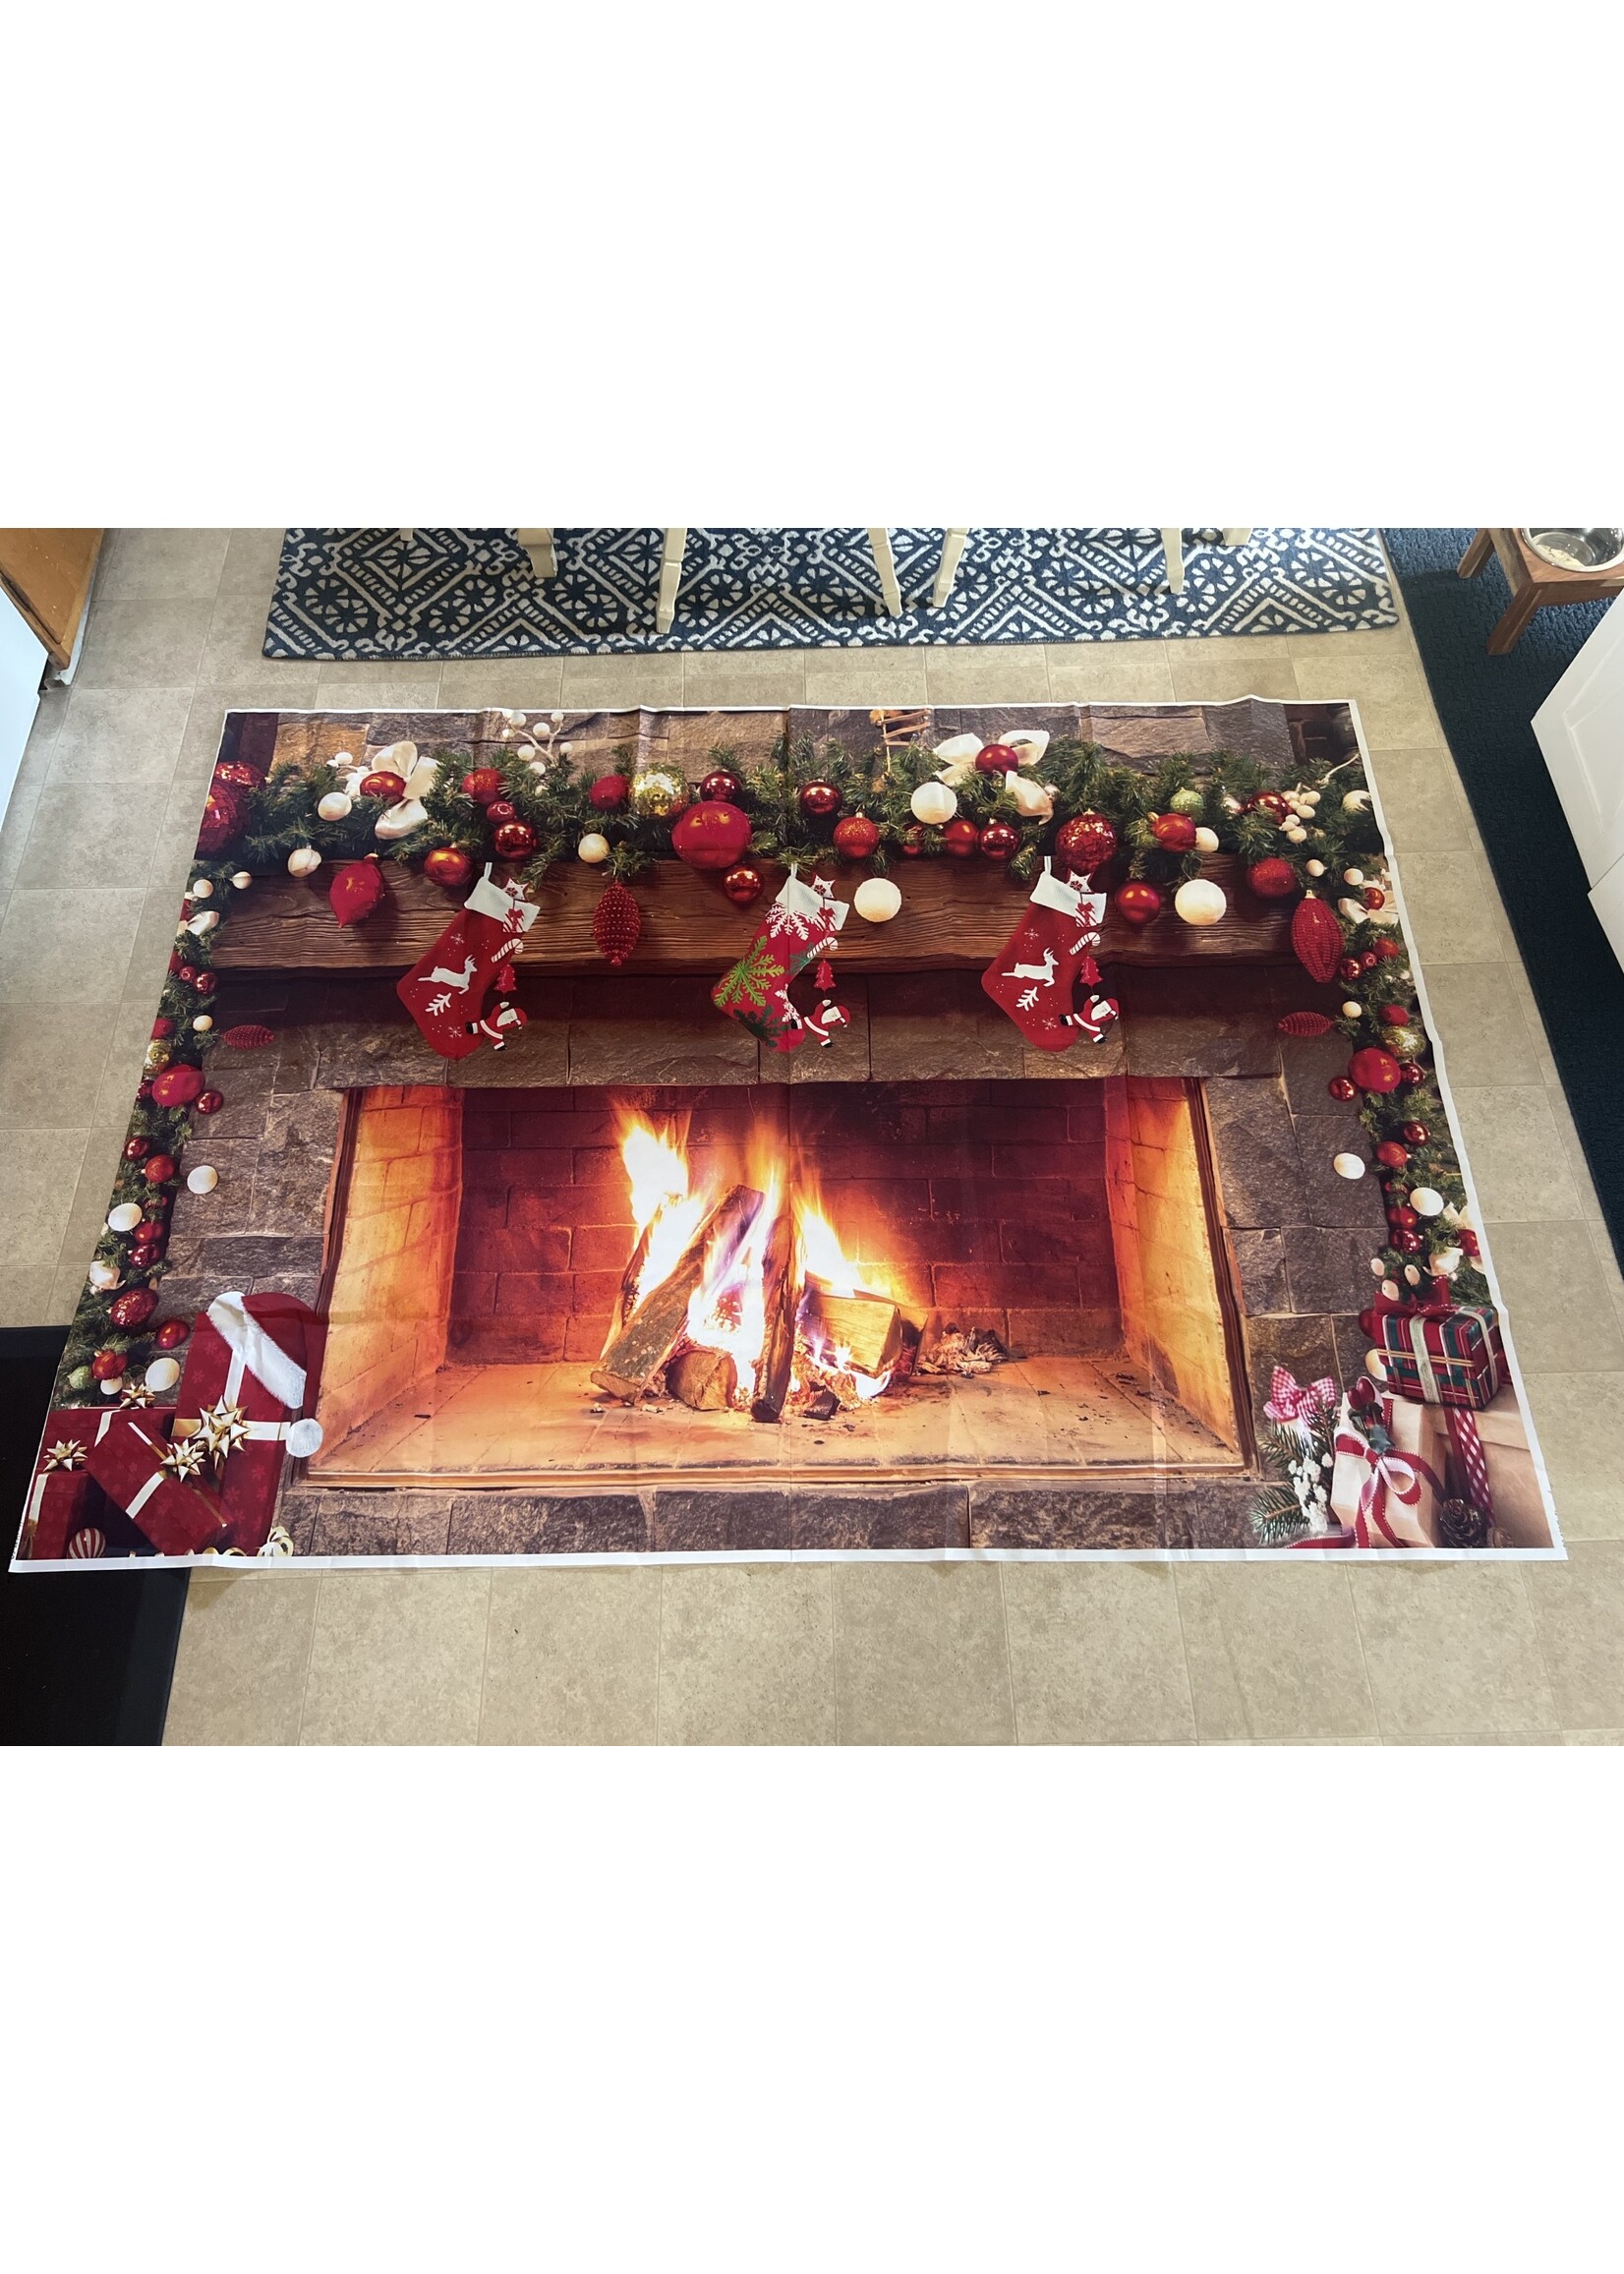 No packaging- Christmas Fireplace Photo Backdrop Banner 5’ x 6’-10”